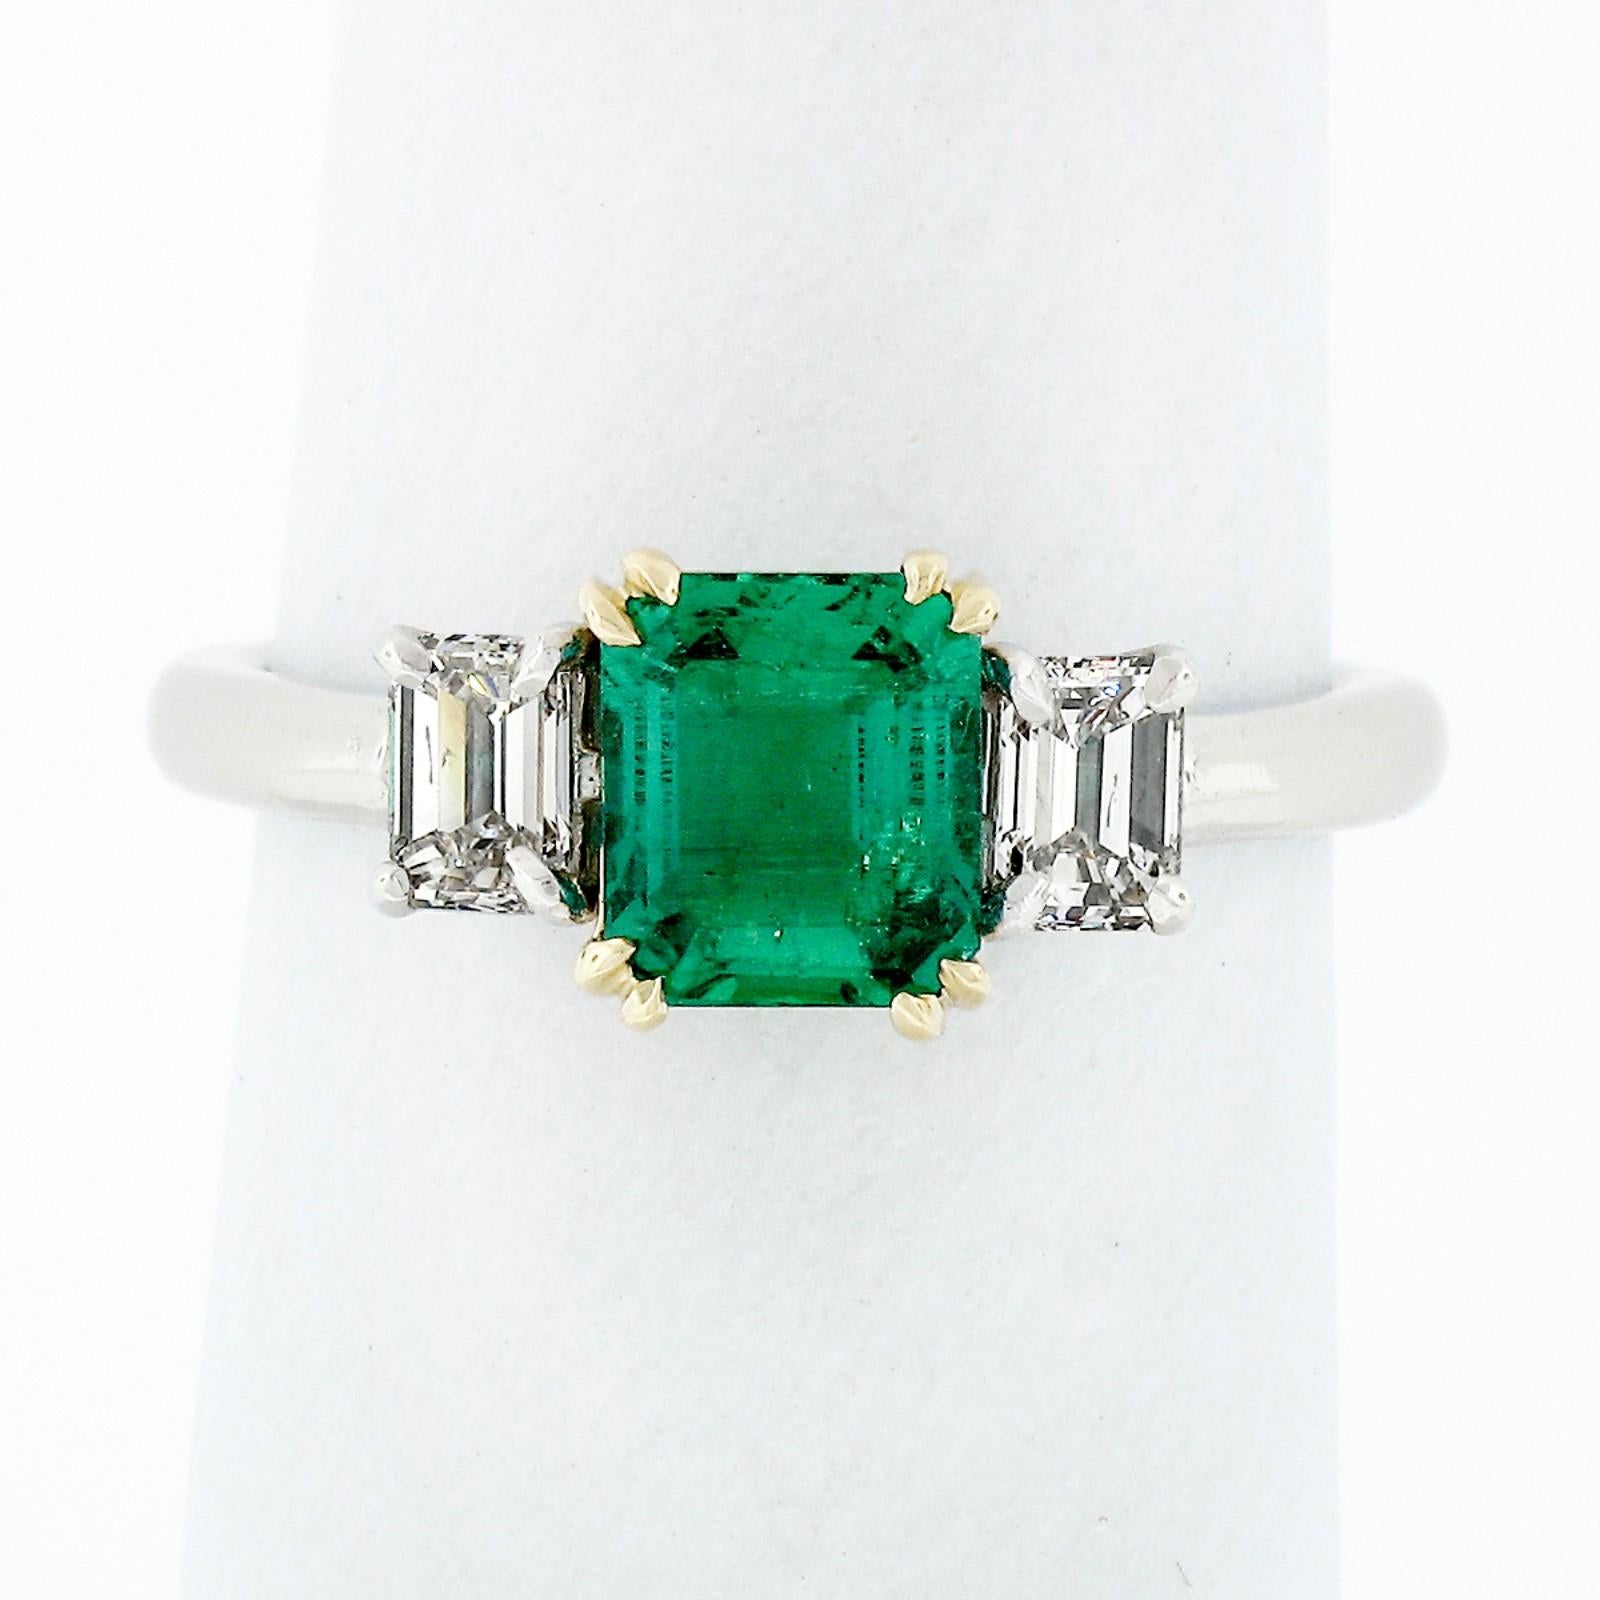 This stunning, GIA certified, Colombian emerald and diamond engagement ring is crafted in in solid platinum. The ring features a breathtaking, natural, octagonal step cut emerald stone that displays the finest and most desirable CLEAN green color.